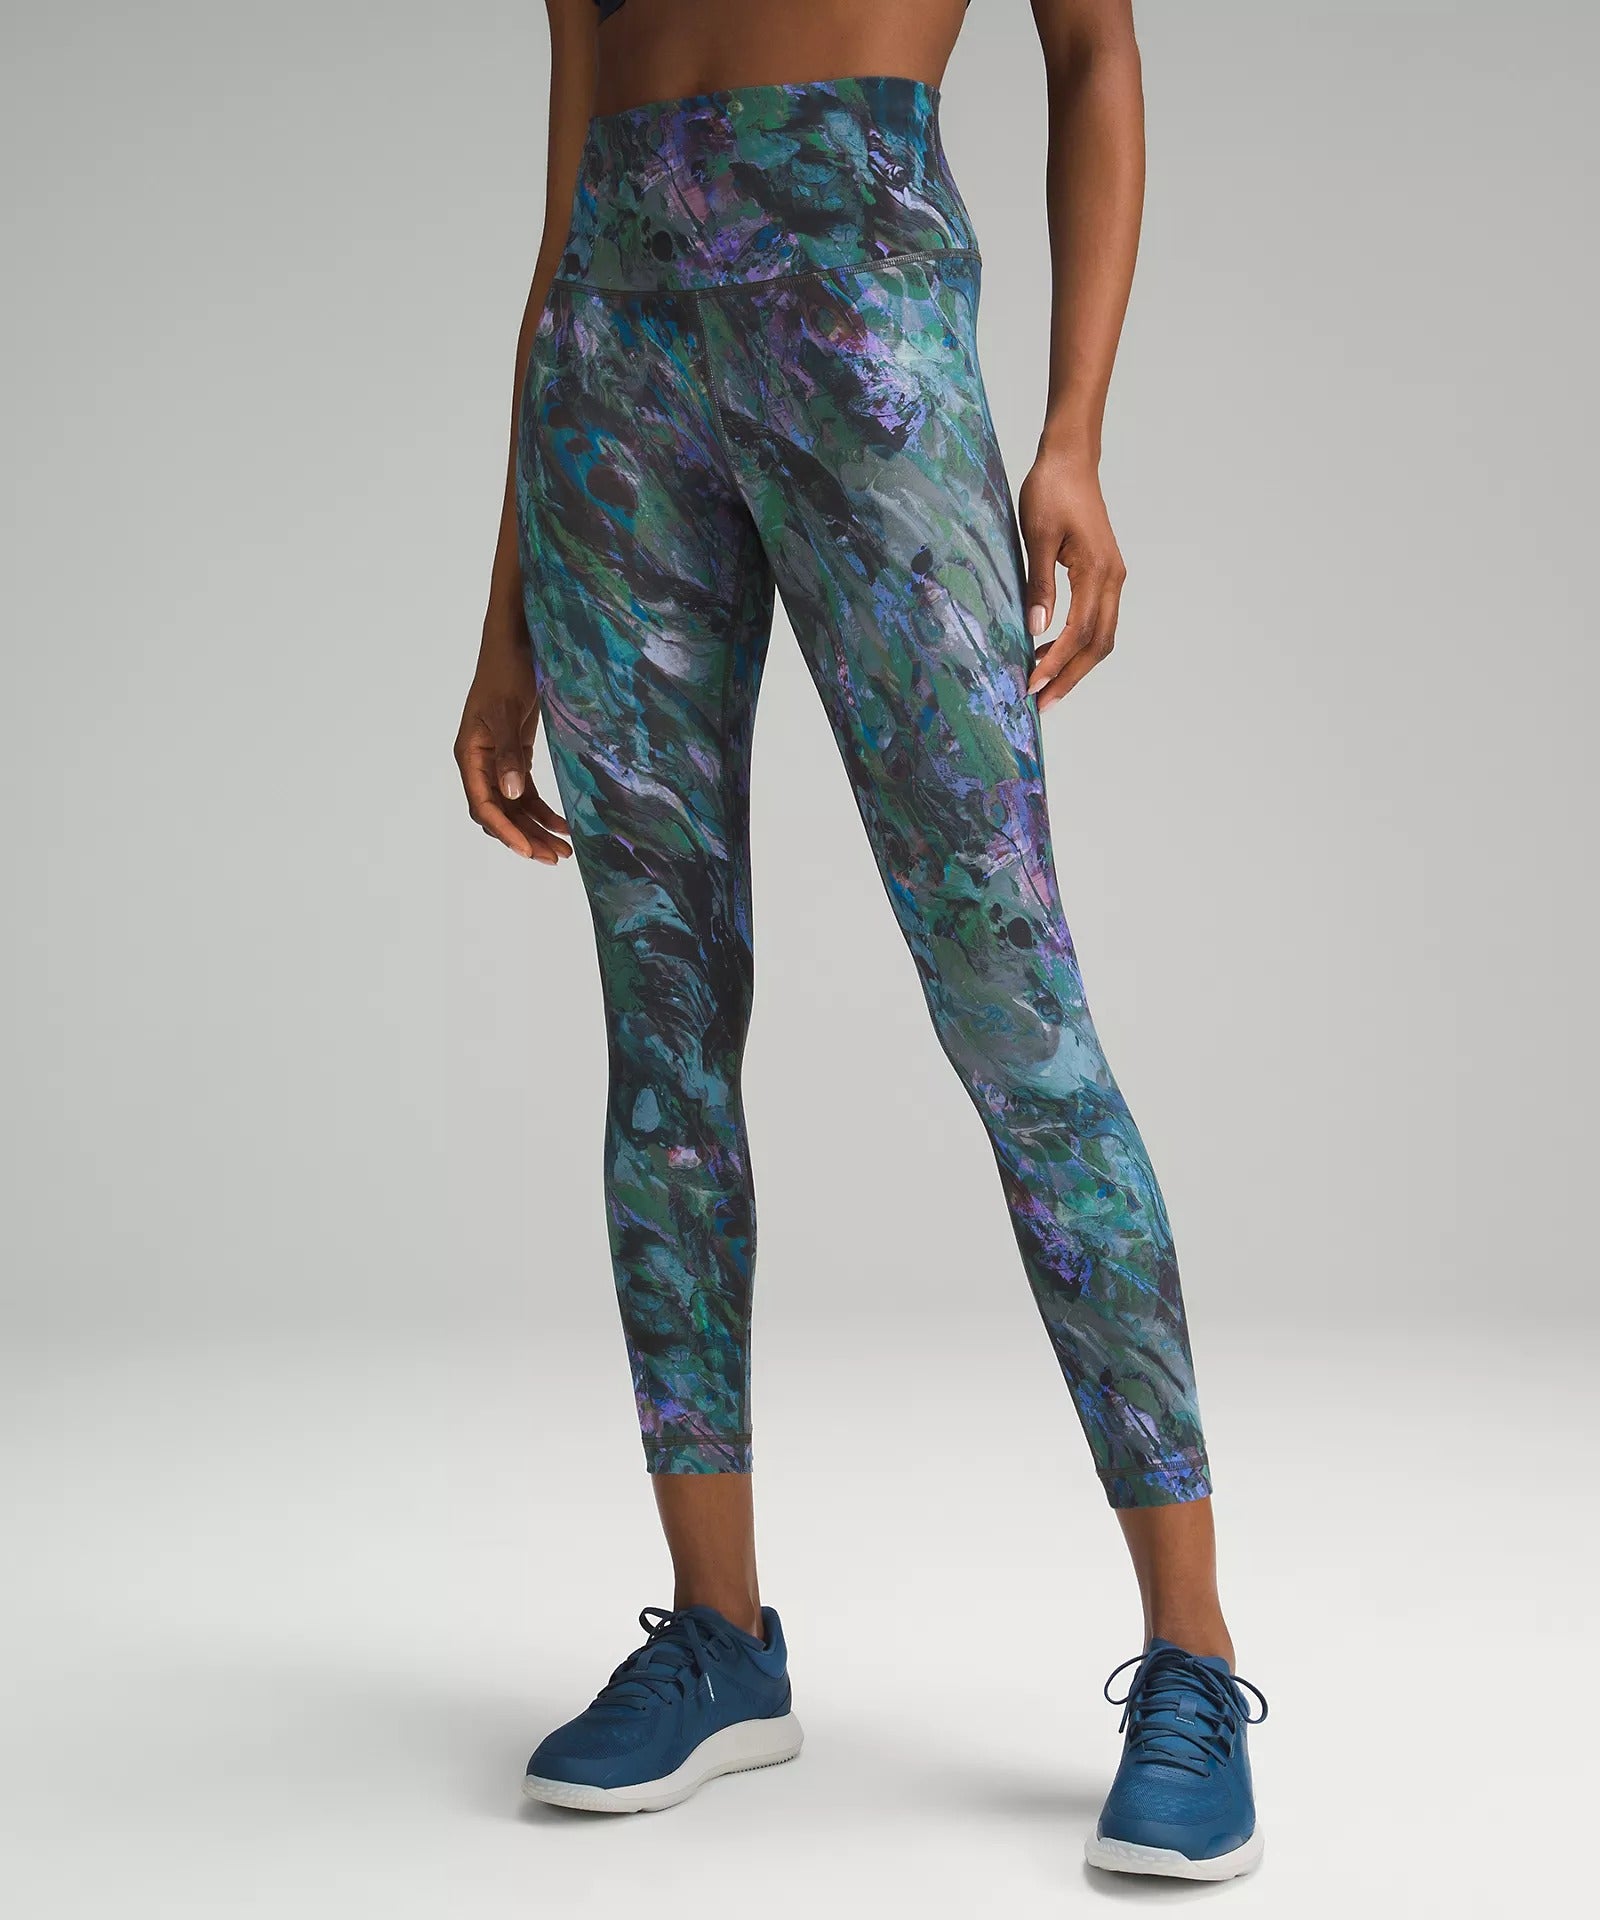 Best affordable leggings that don't look cheap cheap are only $22 on